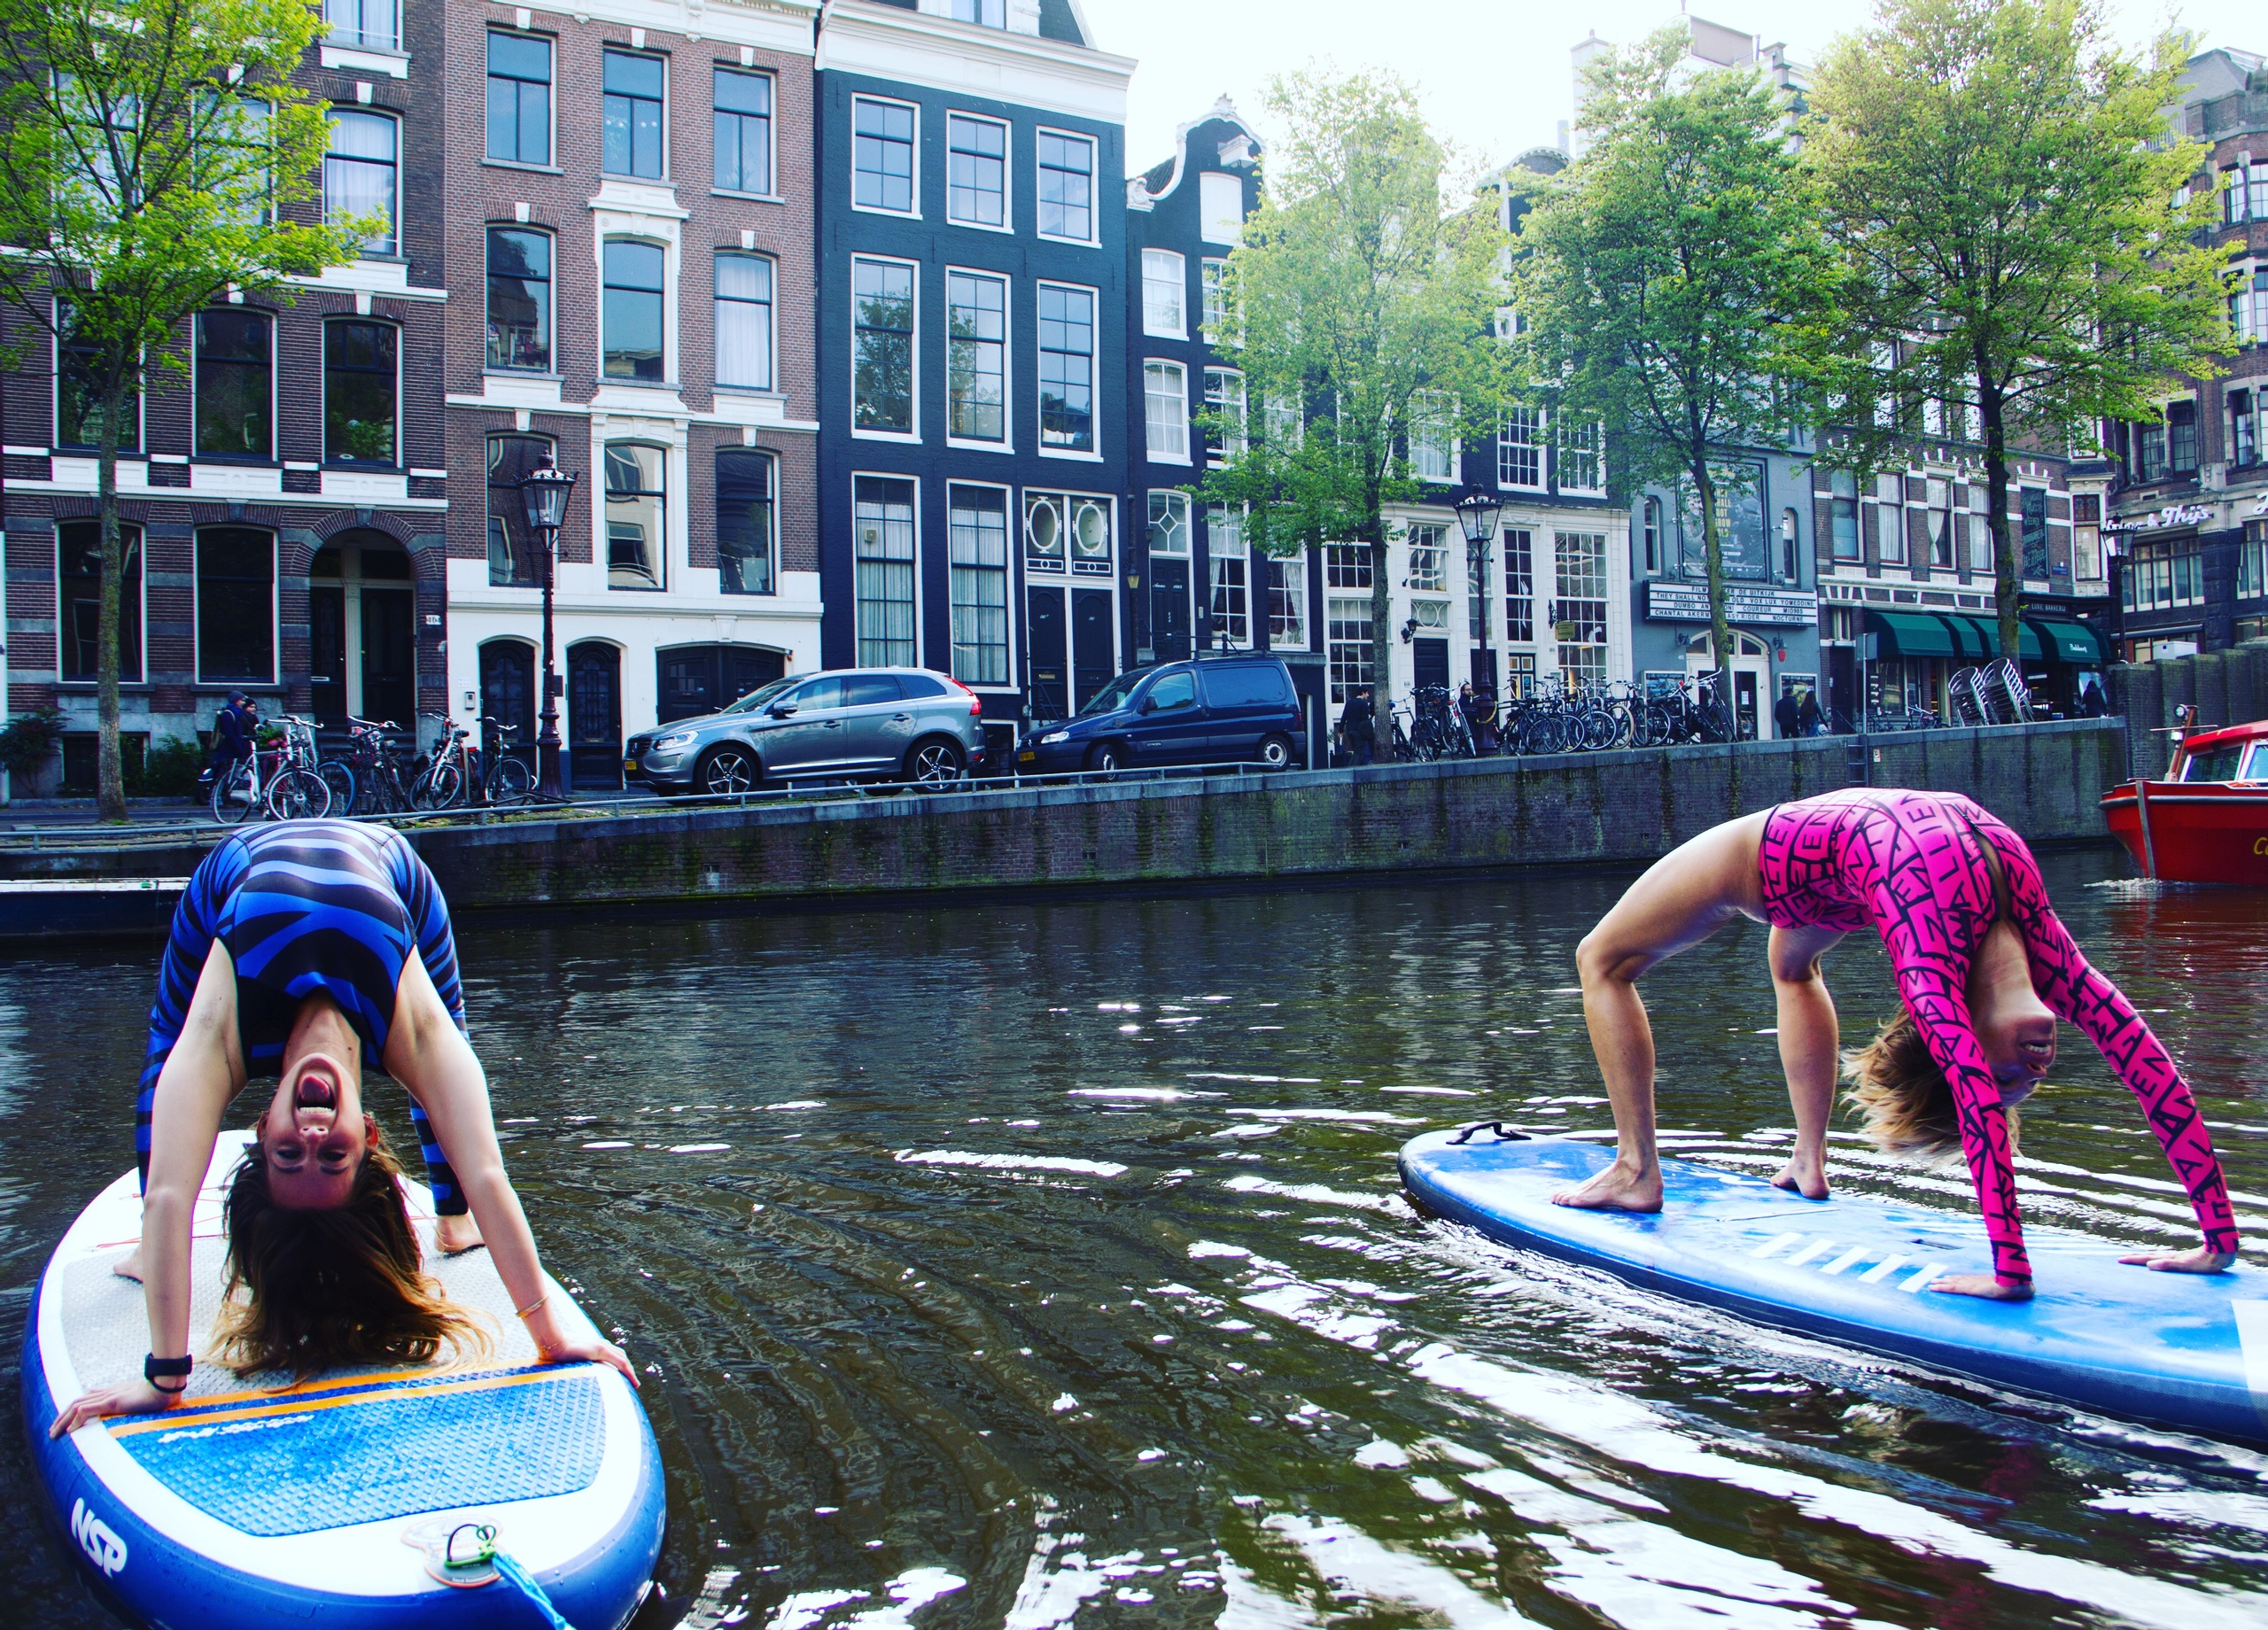 SUP Fit Session in Amsterdam